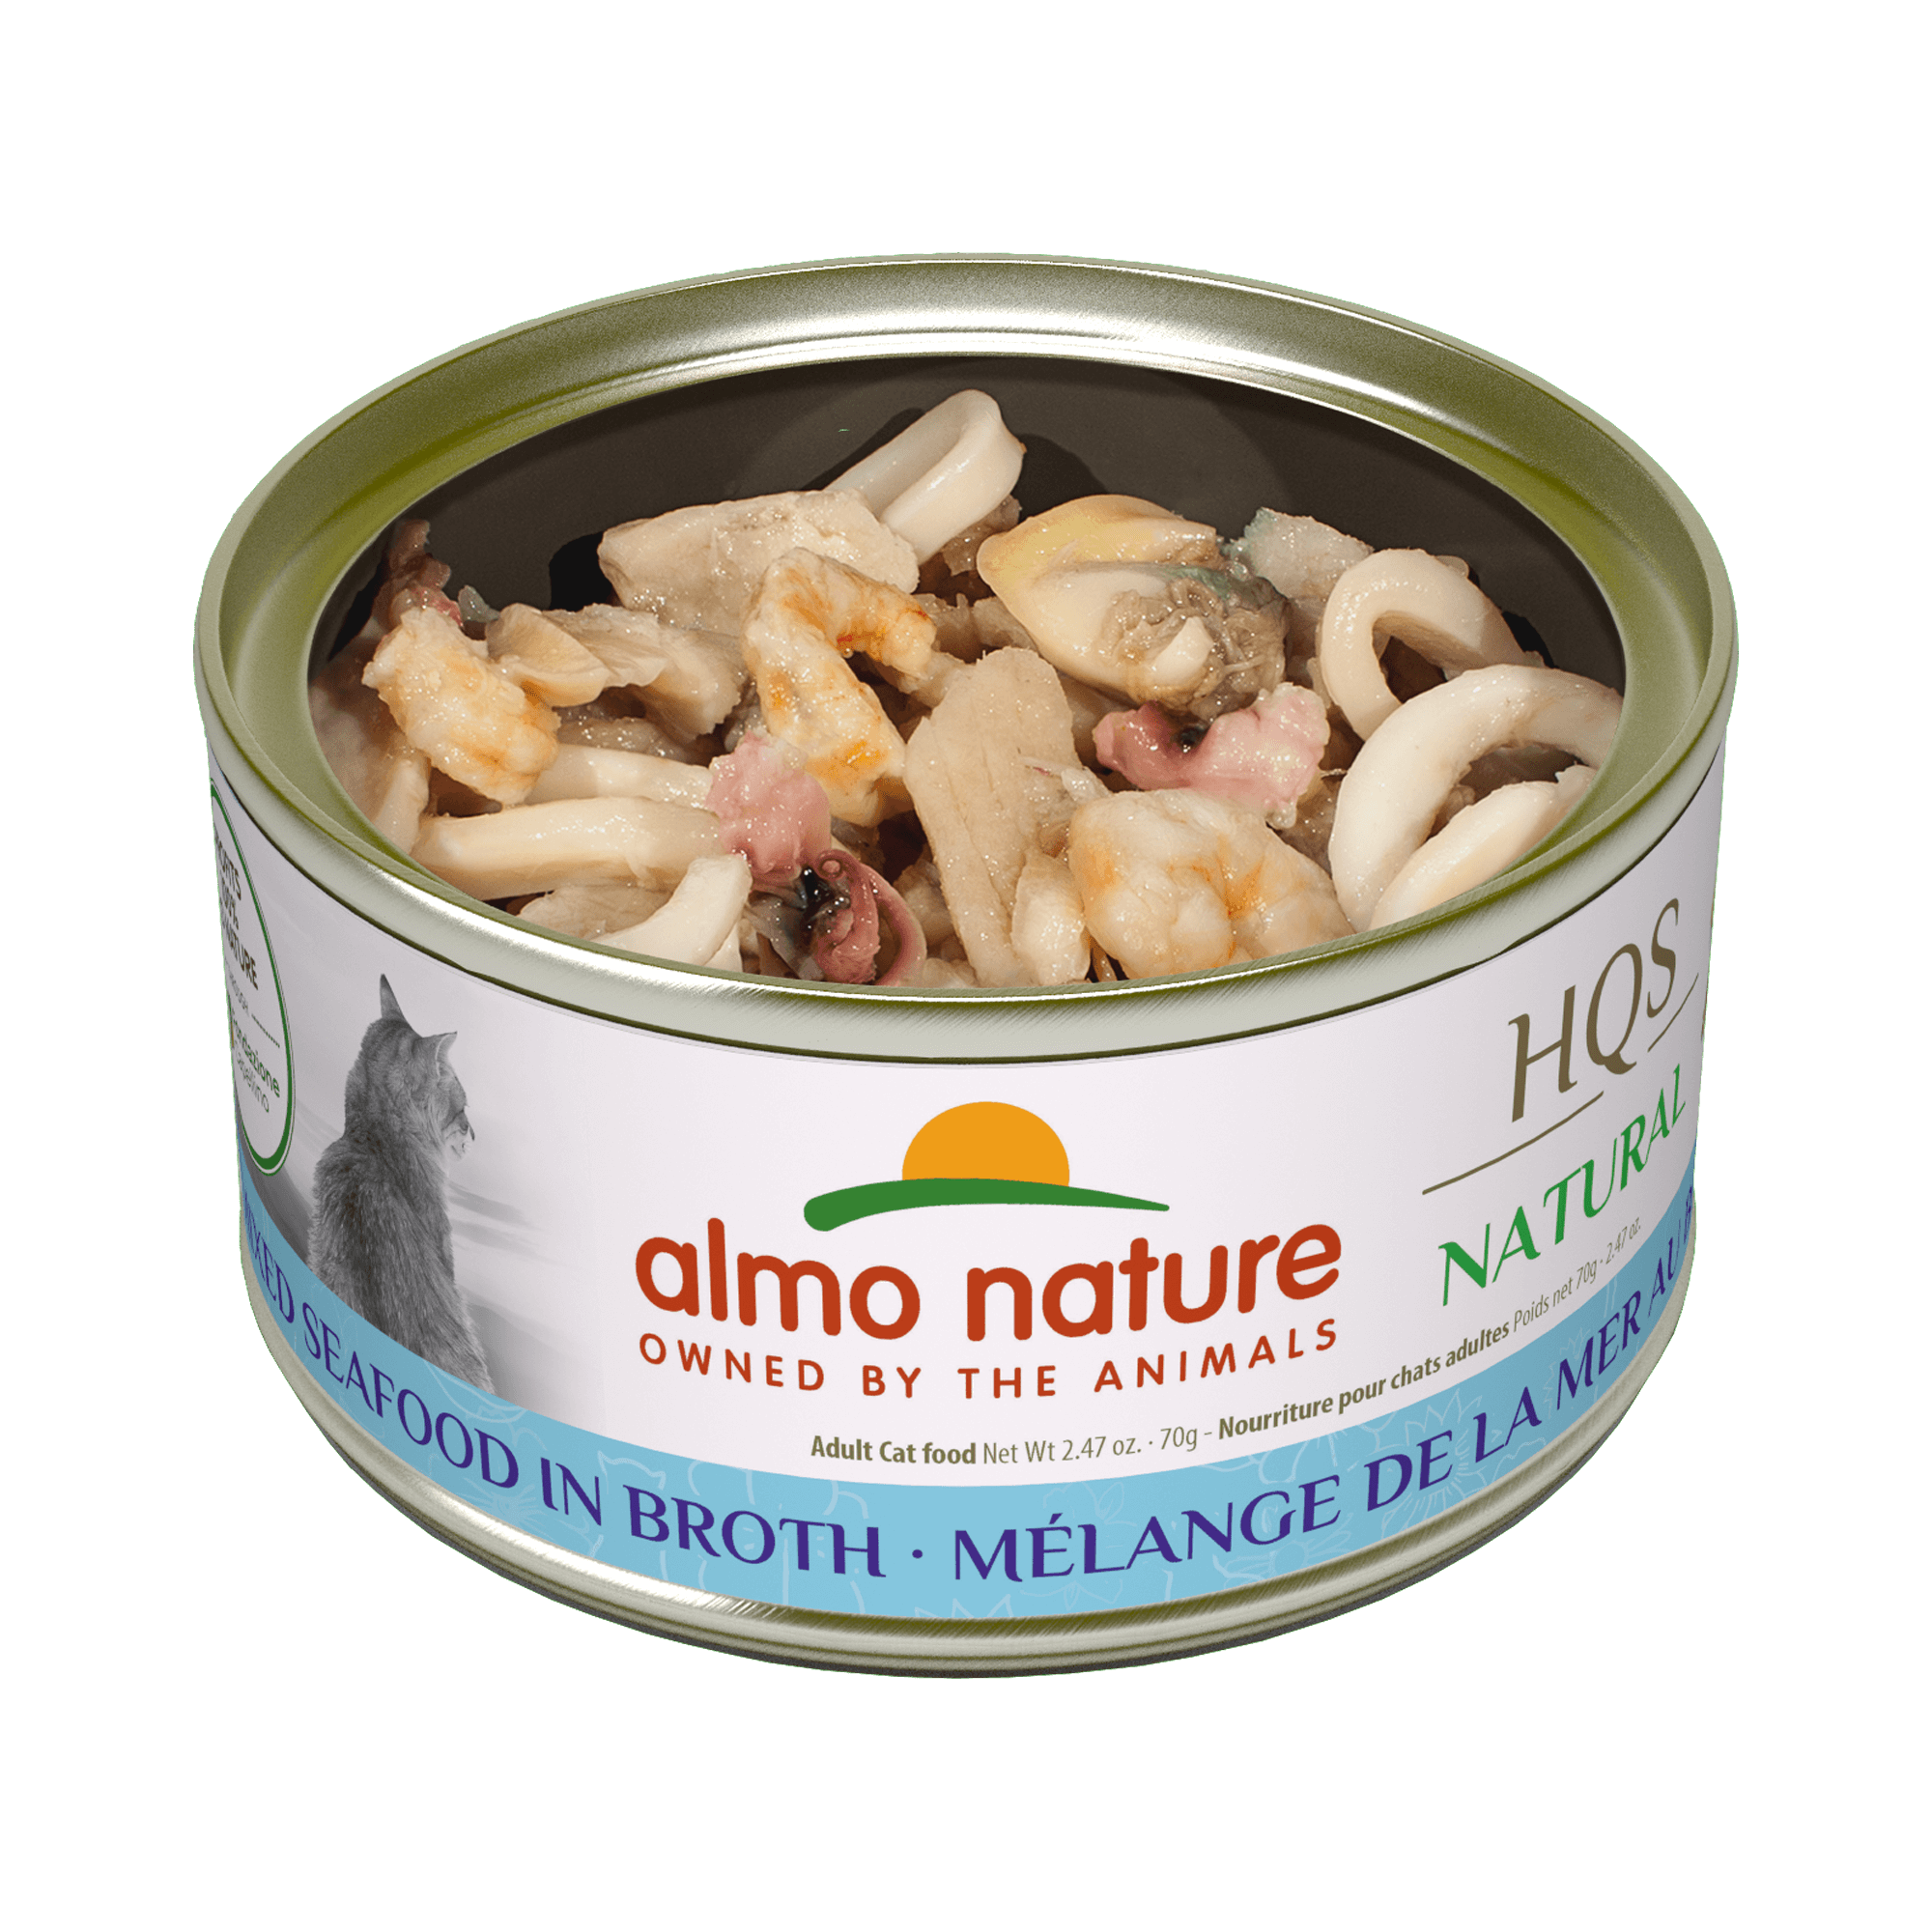 Almo Nature - HQS Natural Mixed Seafood in Broth (Wet Cat Food)